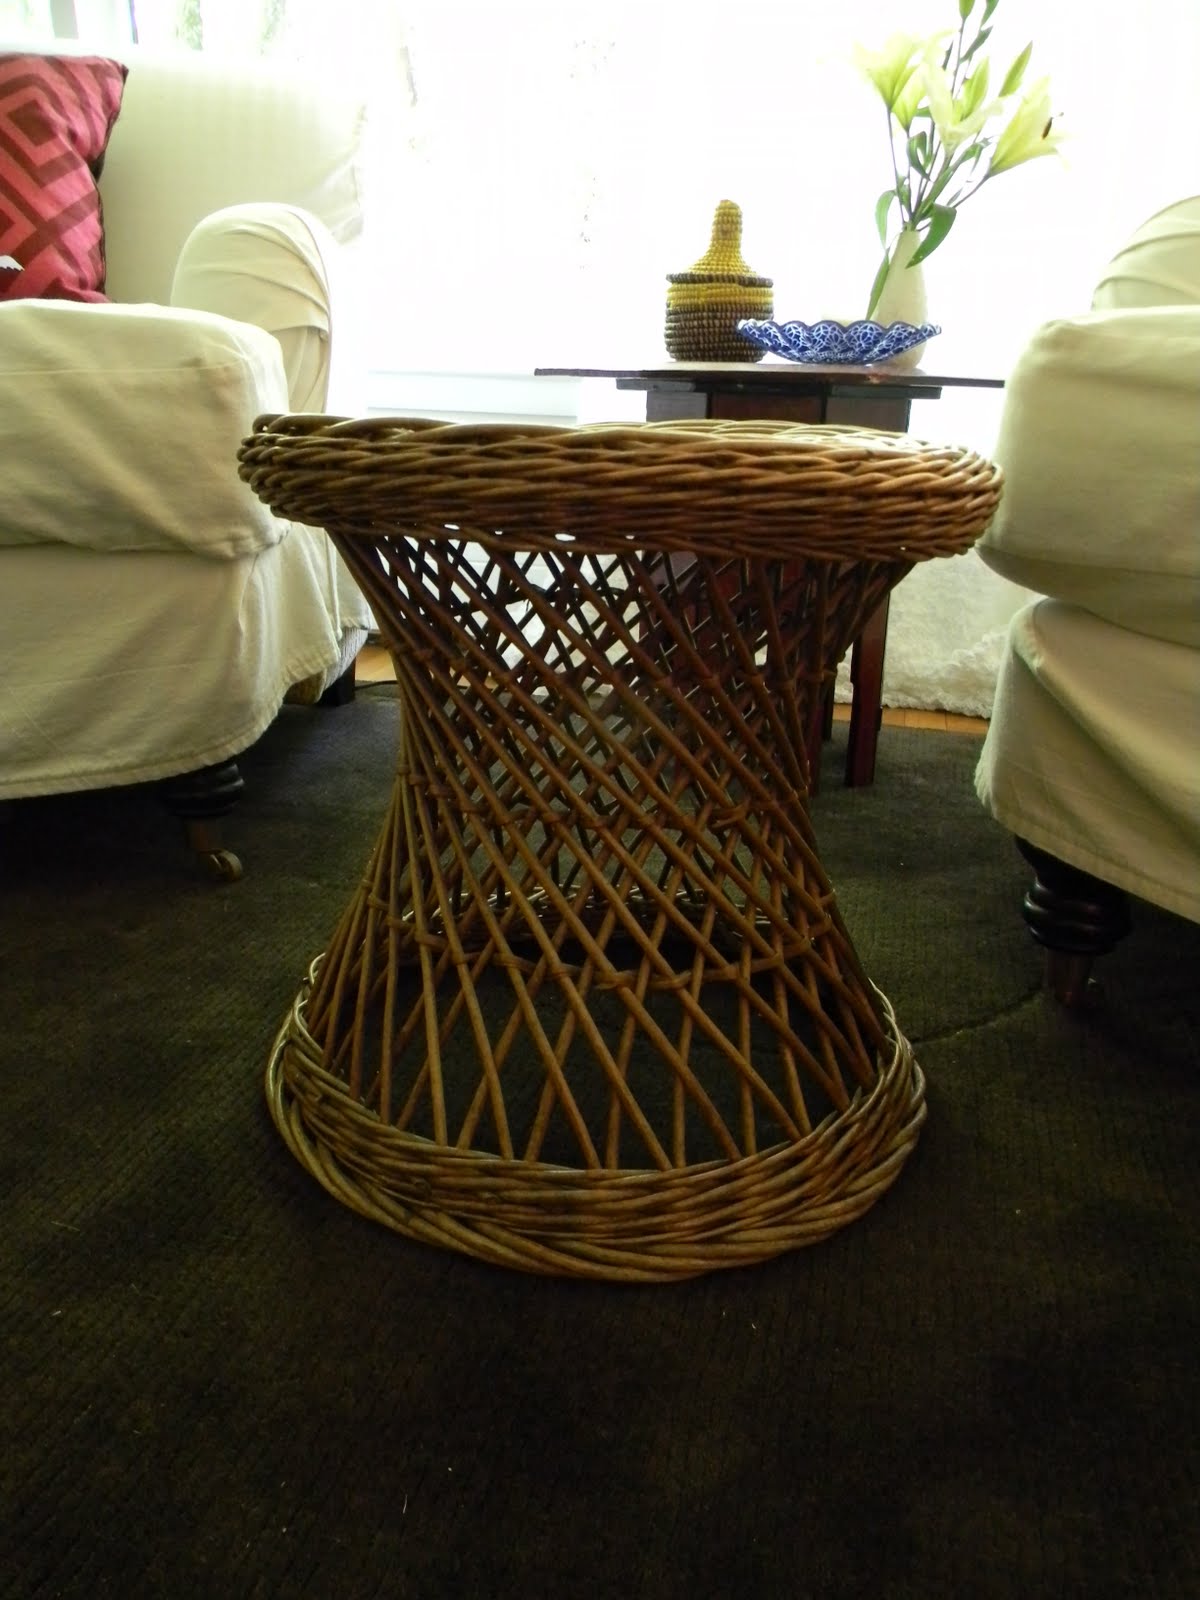 GORGEOUS SHINY THINGS SHOP: Antique Wicker Side Table or Stool